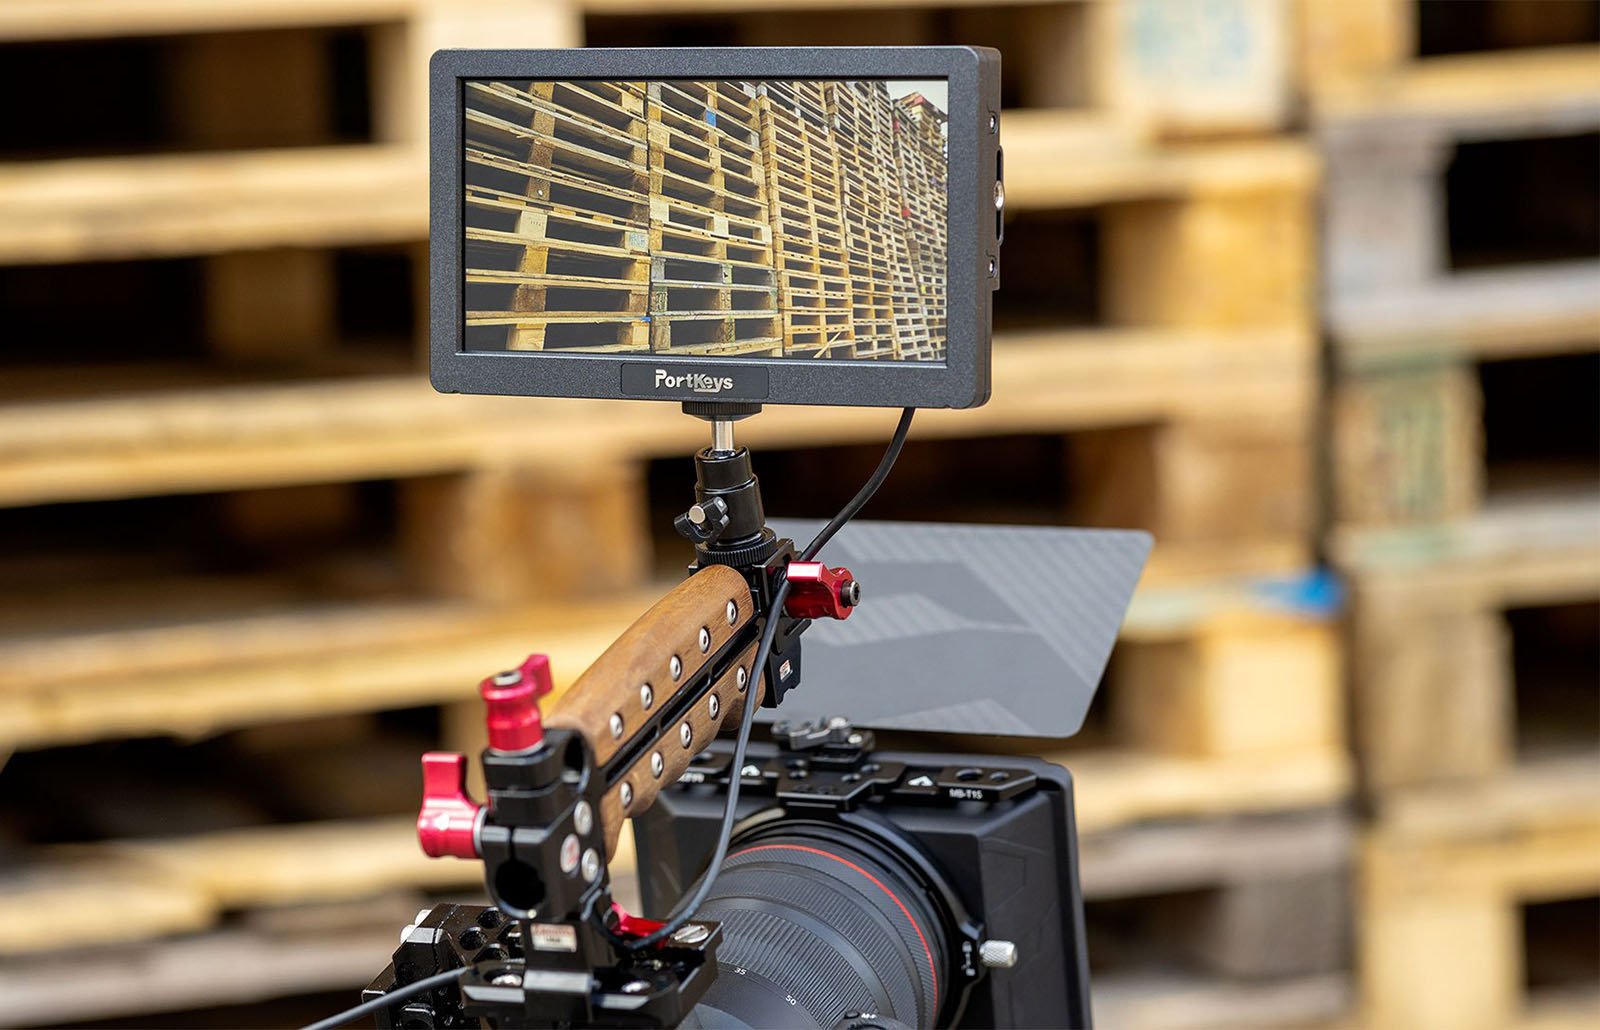 Close-up of a professional camera setup with a wooden handle and attached monitor displaying an image of stacked wooden pallets. The background shows a warehouse setting with more wooden pallets blurred out.